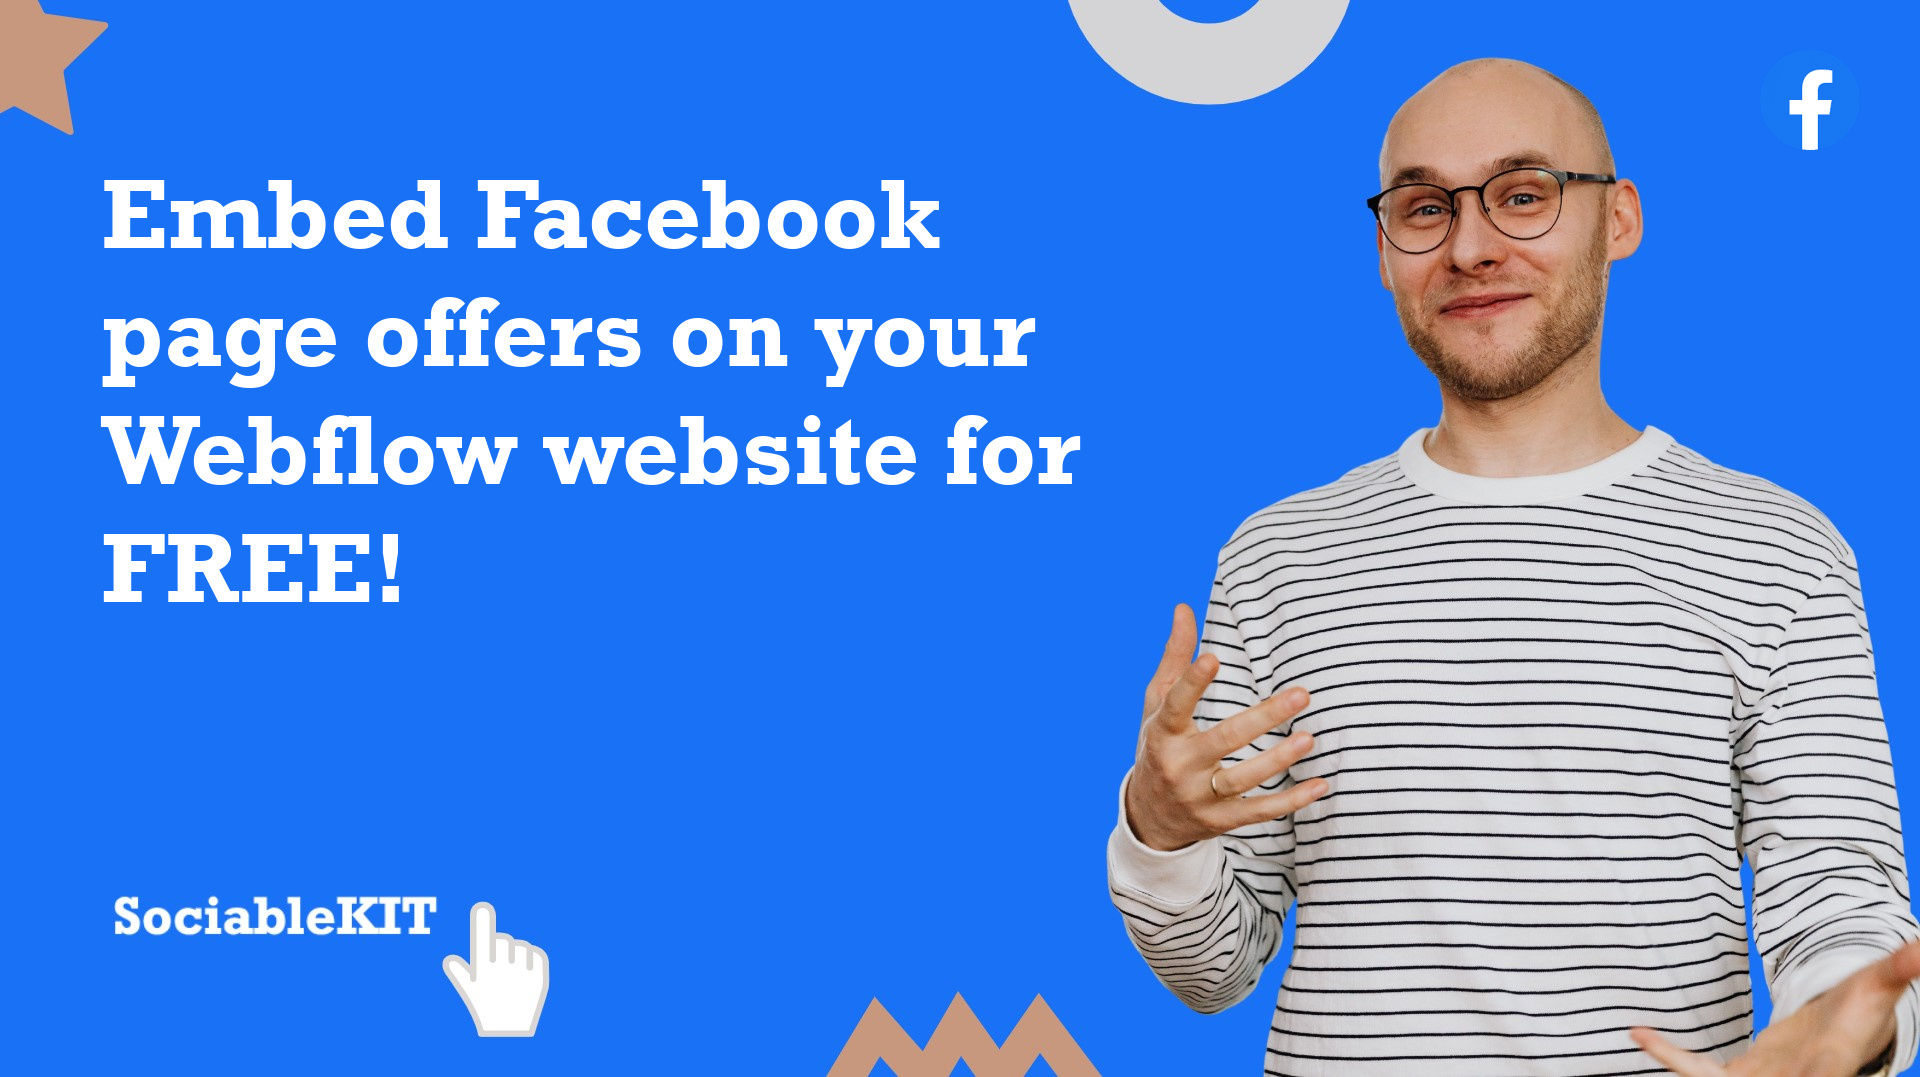 How to embed Facebook page offers on your Webflow website for FREE?